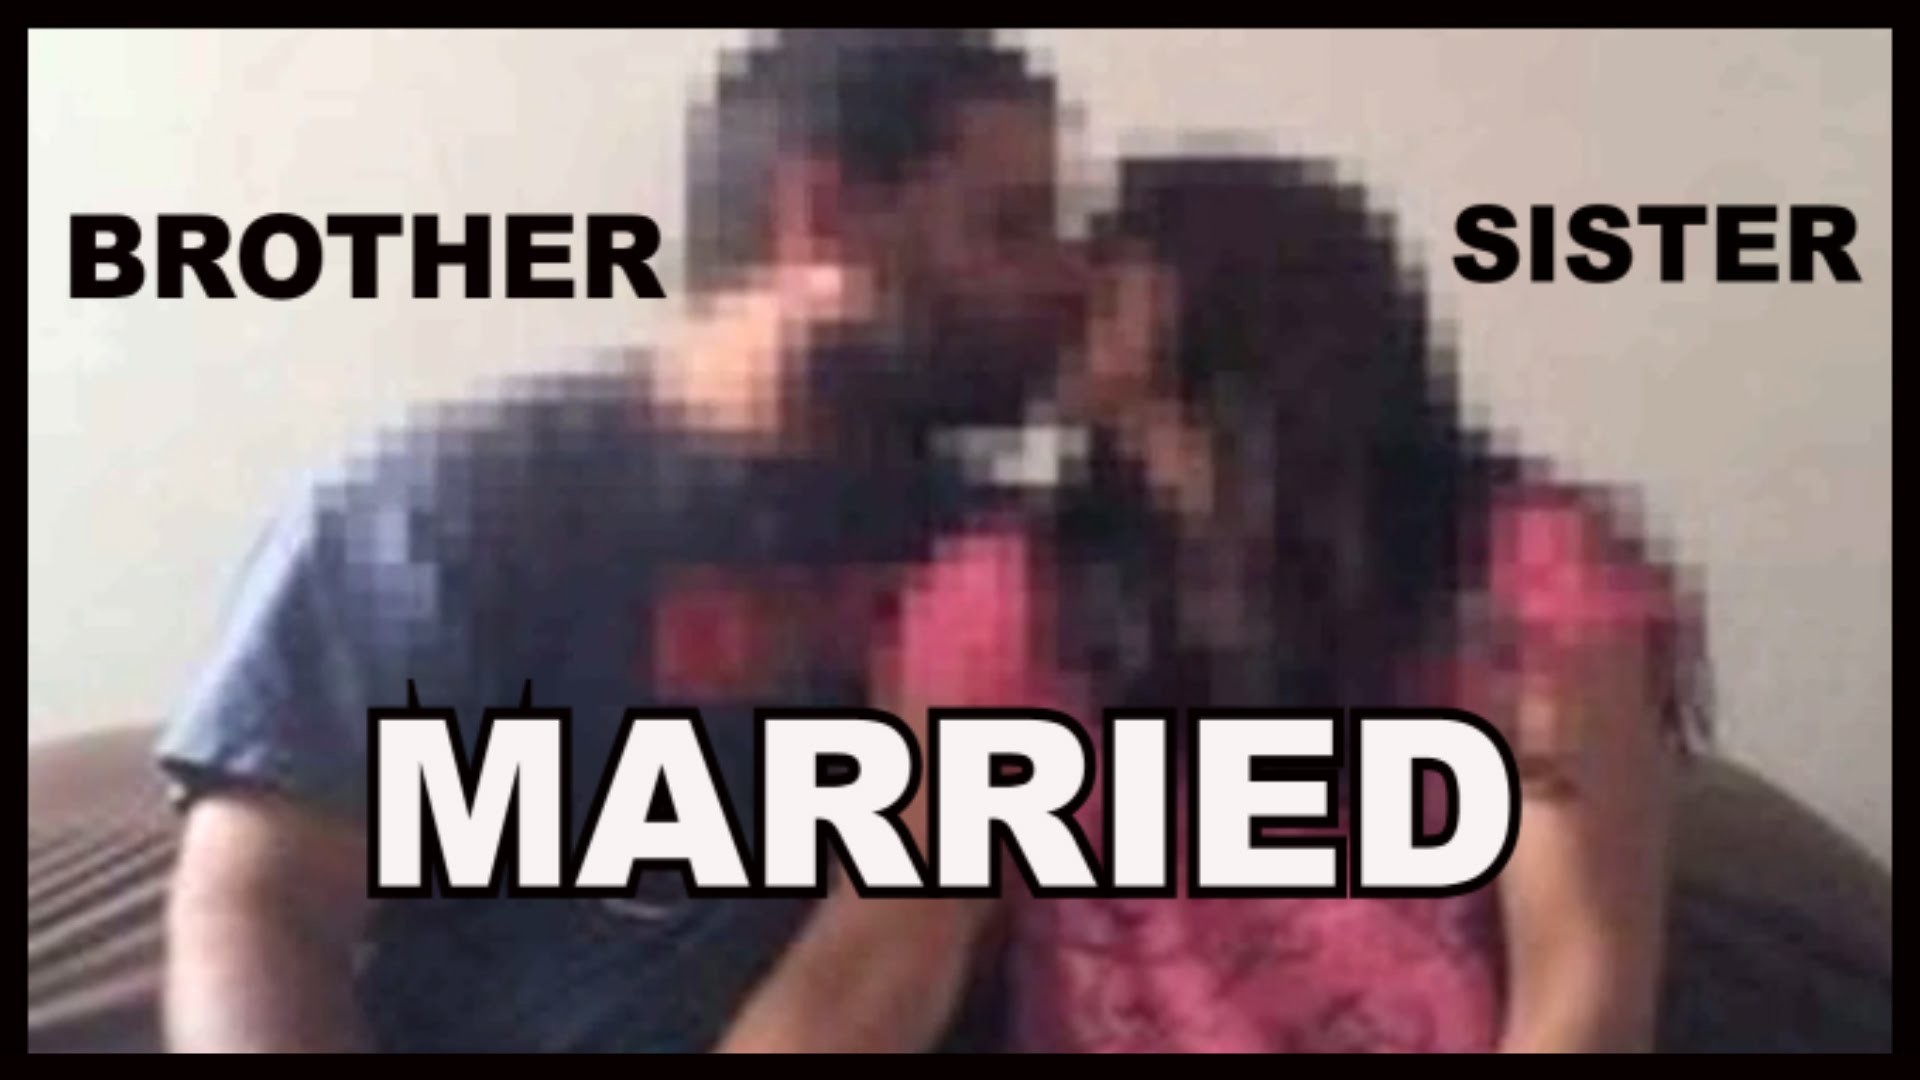 1920x1080 This Brother Is Sleeping With His Sister - And He Married Her - YouTube